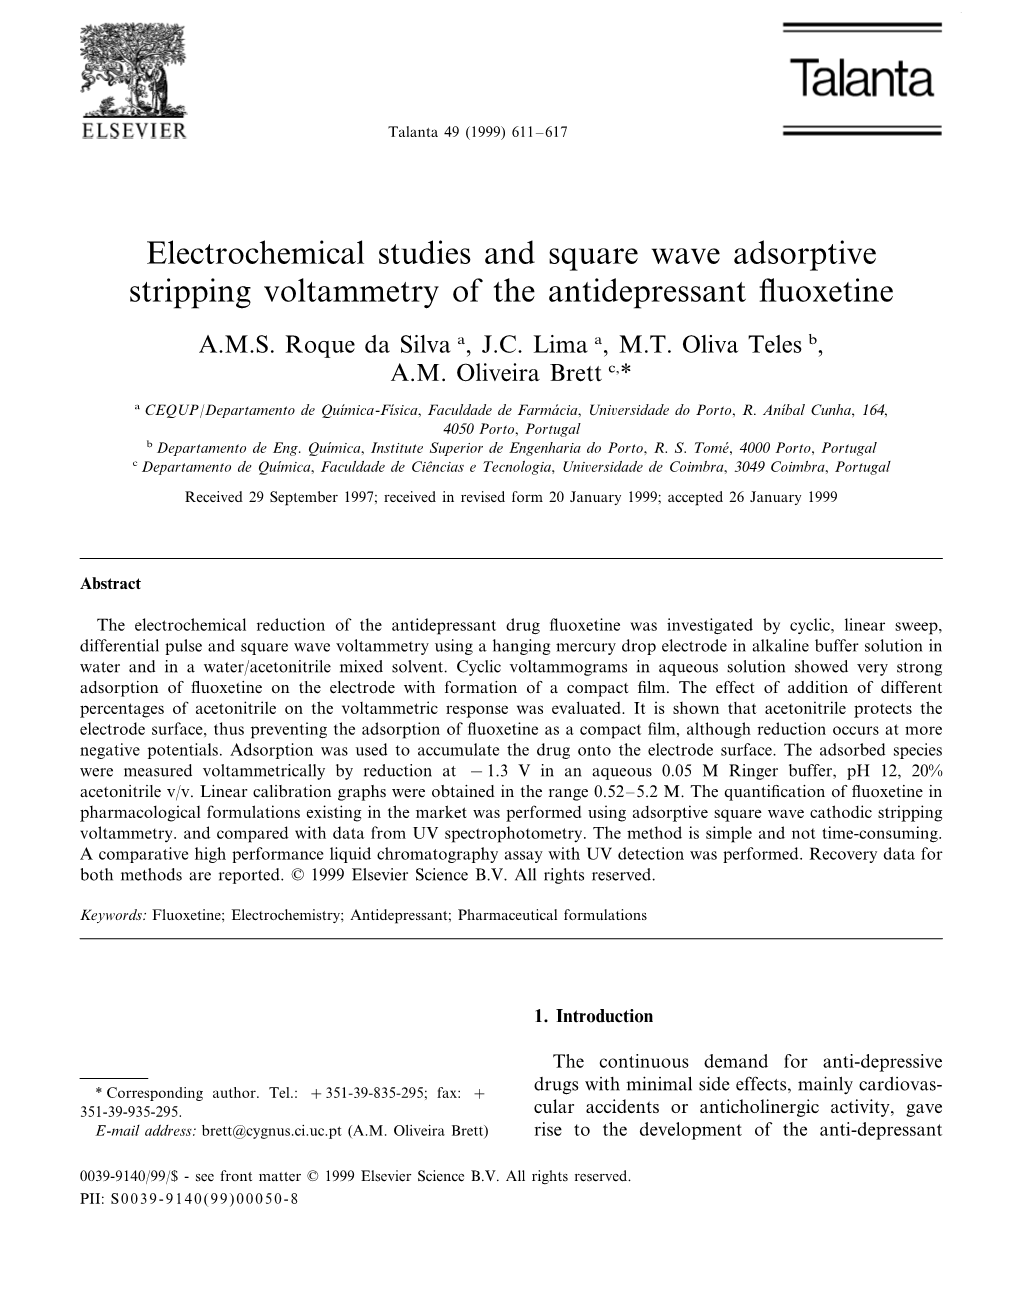 Electrochemical Studies and Square Wave Adsorptive Stripping Voltammetry of the Antidepressant ﬂuoxetine